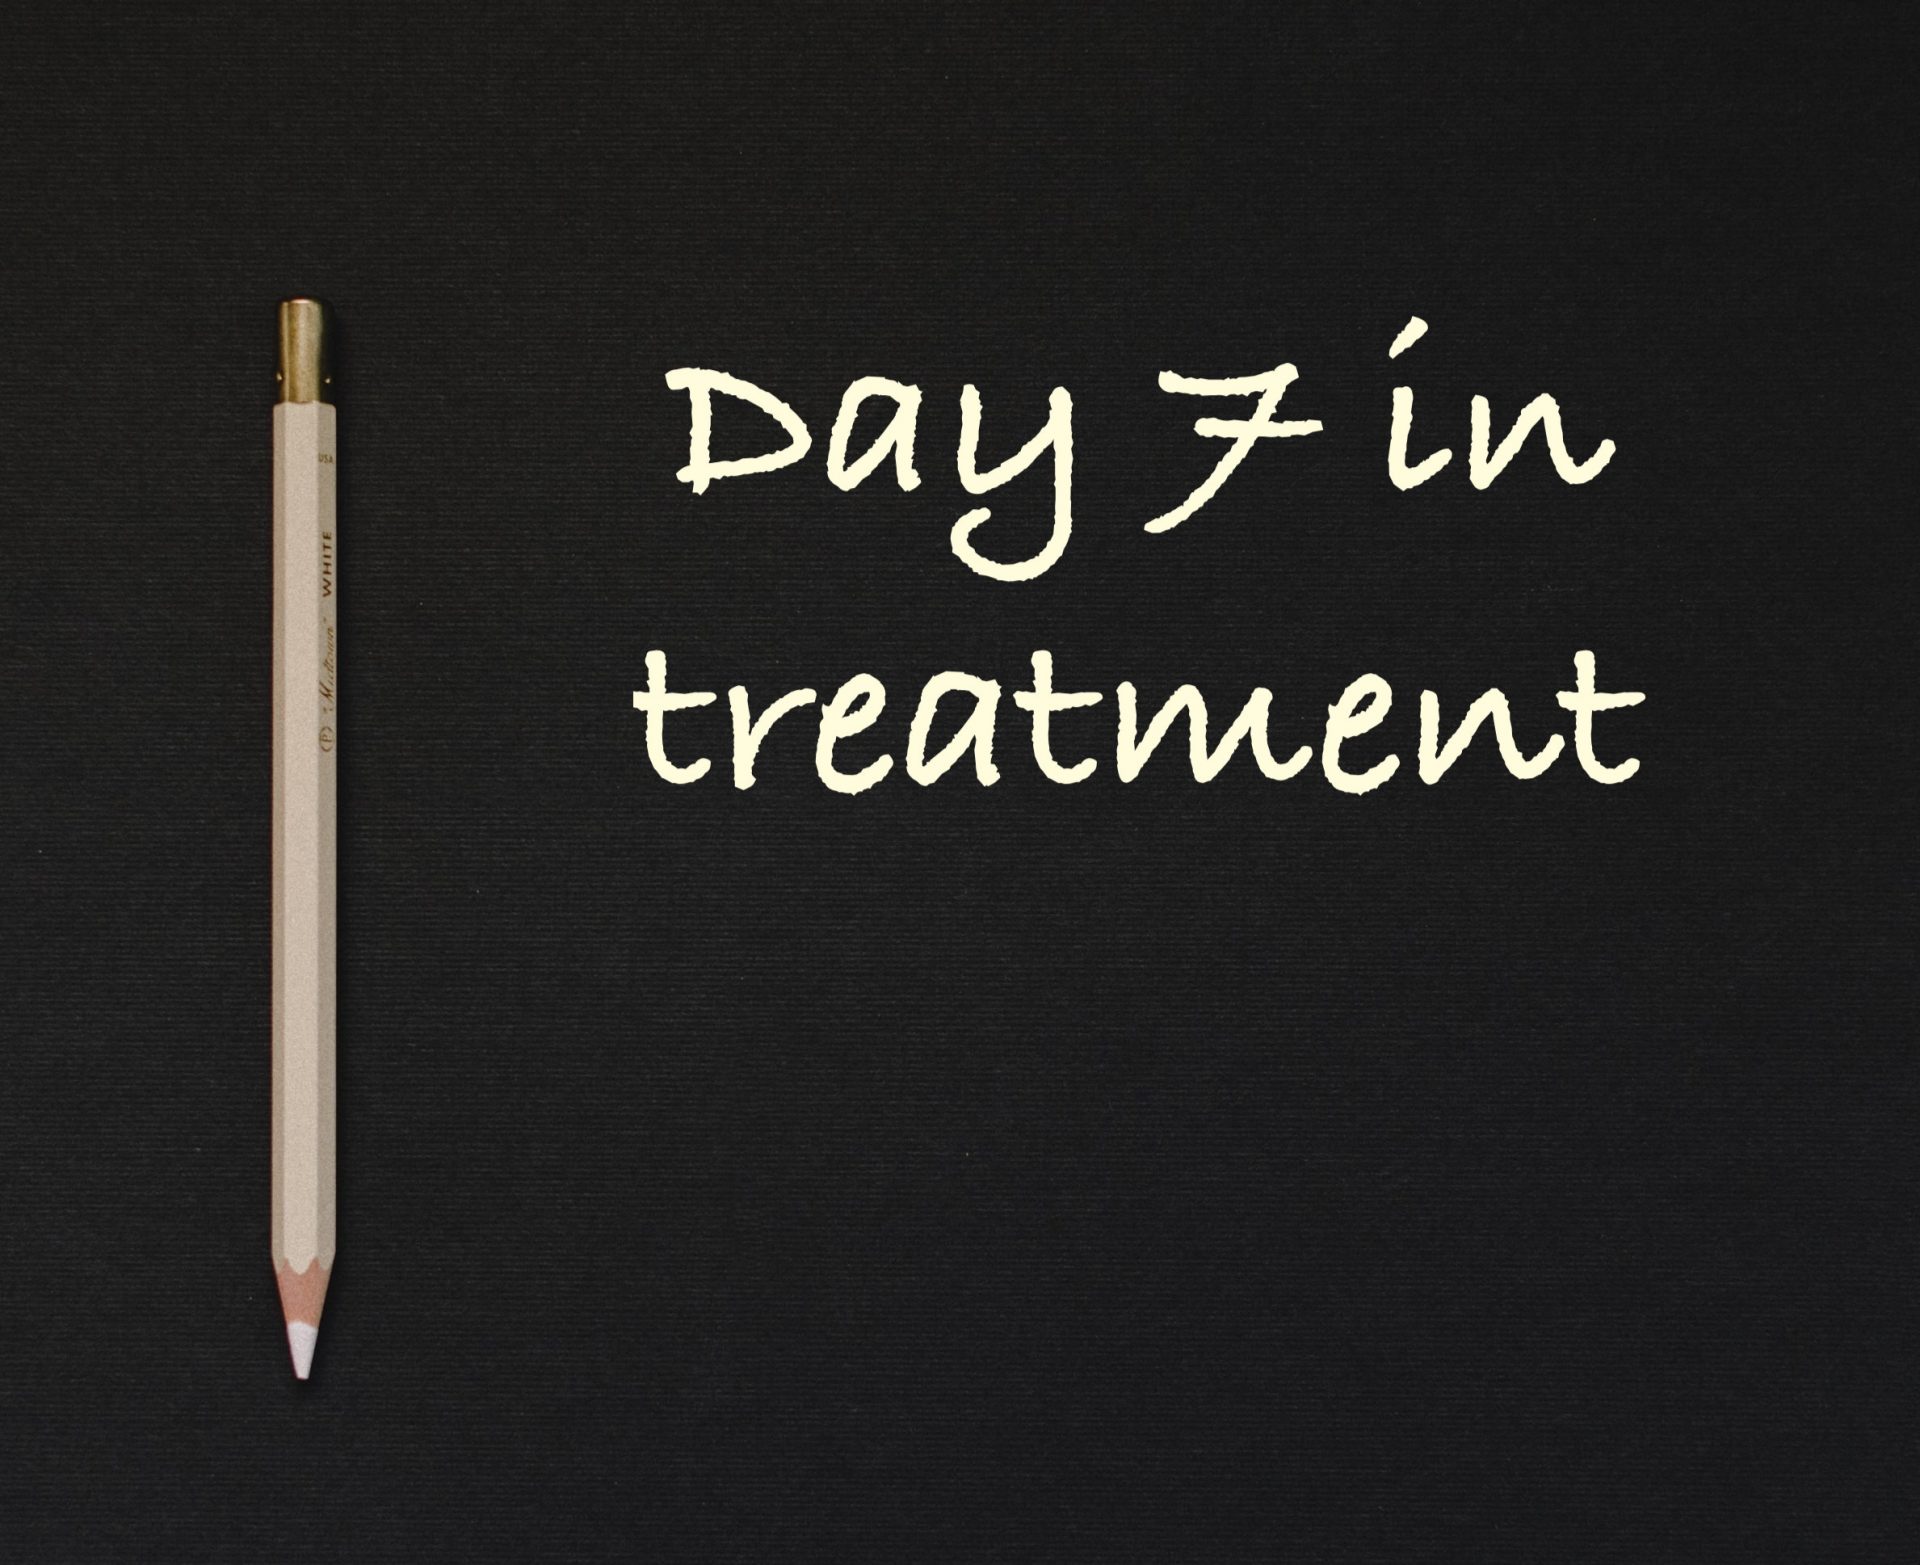 Day 7 in treatment